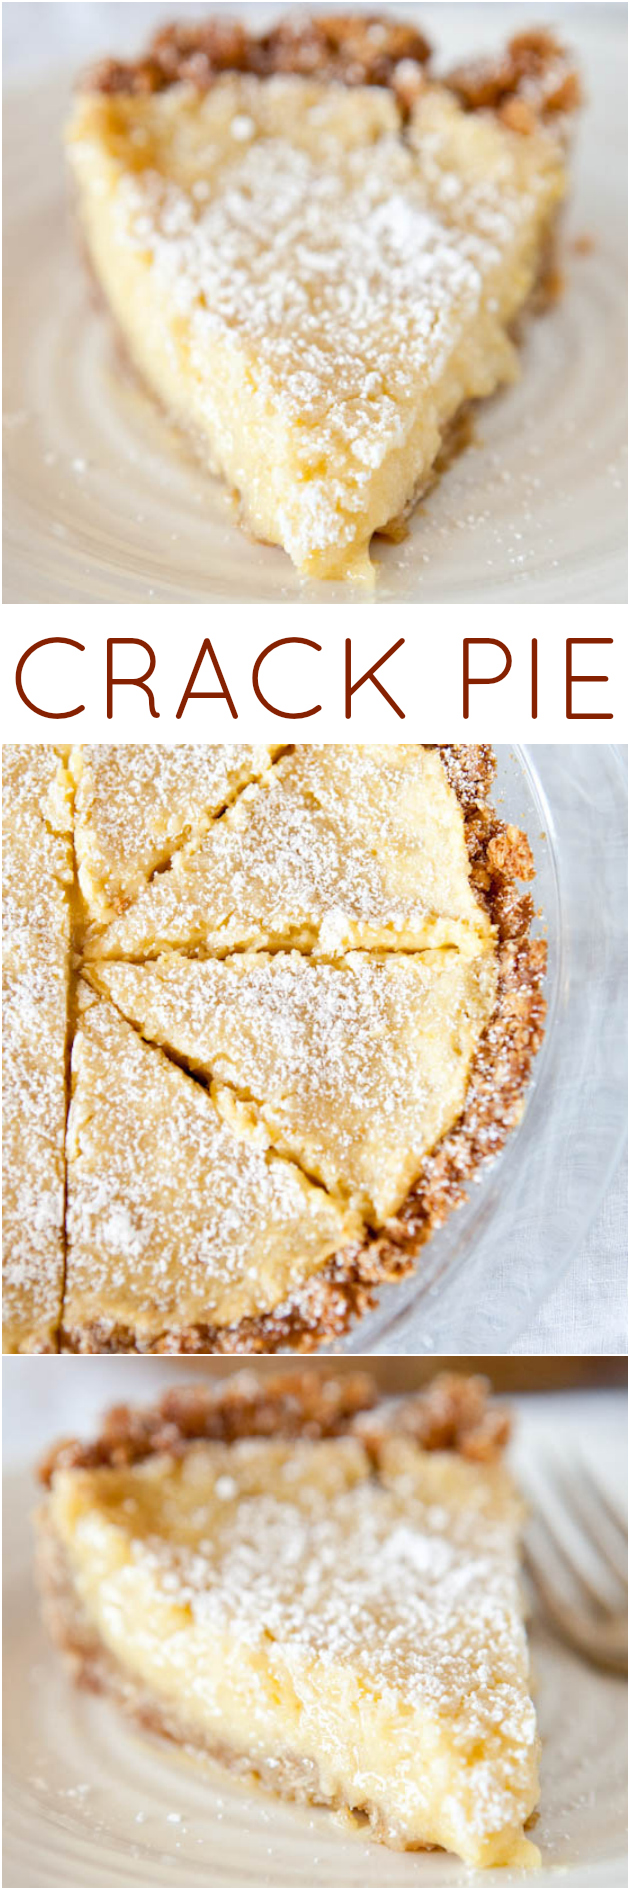 Crack Pie from the Momofoku Milkbar cookbook - There's a reason this pie has it's name. And it definitely lives up to the hype! (the pie sells for $44.00 at Momofoku's!)